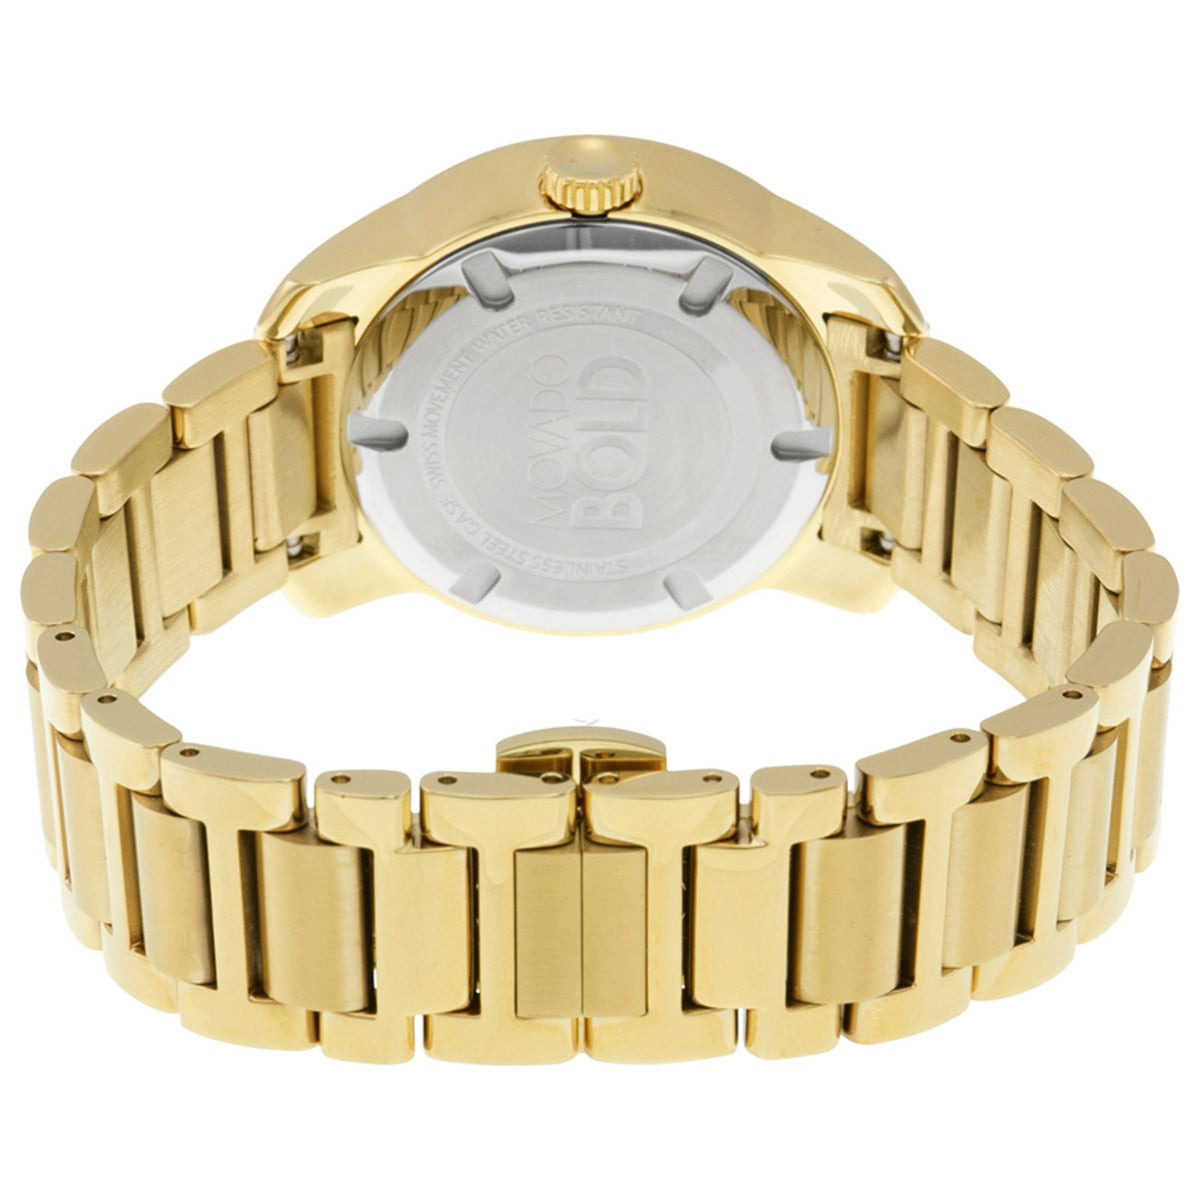 Movado Bold Gold Pave Dial Gold Steel Strap Watch For Women - 3600255